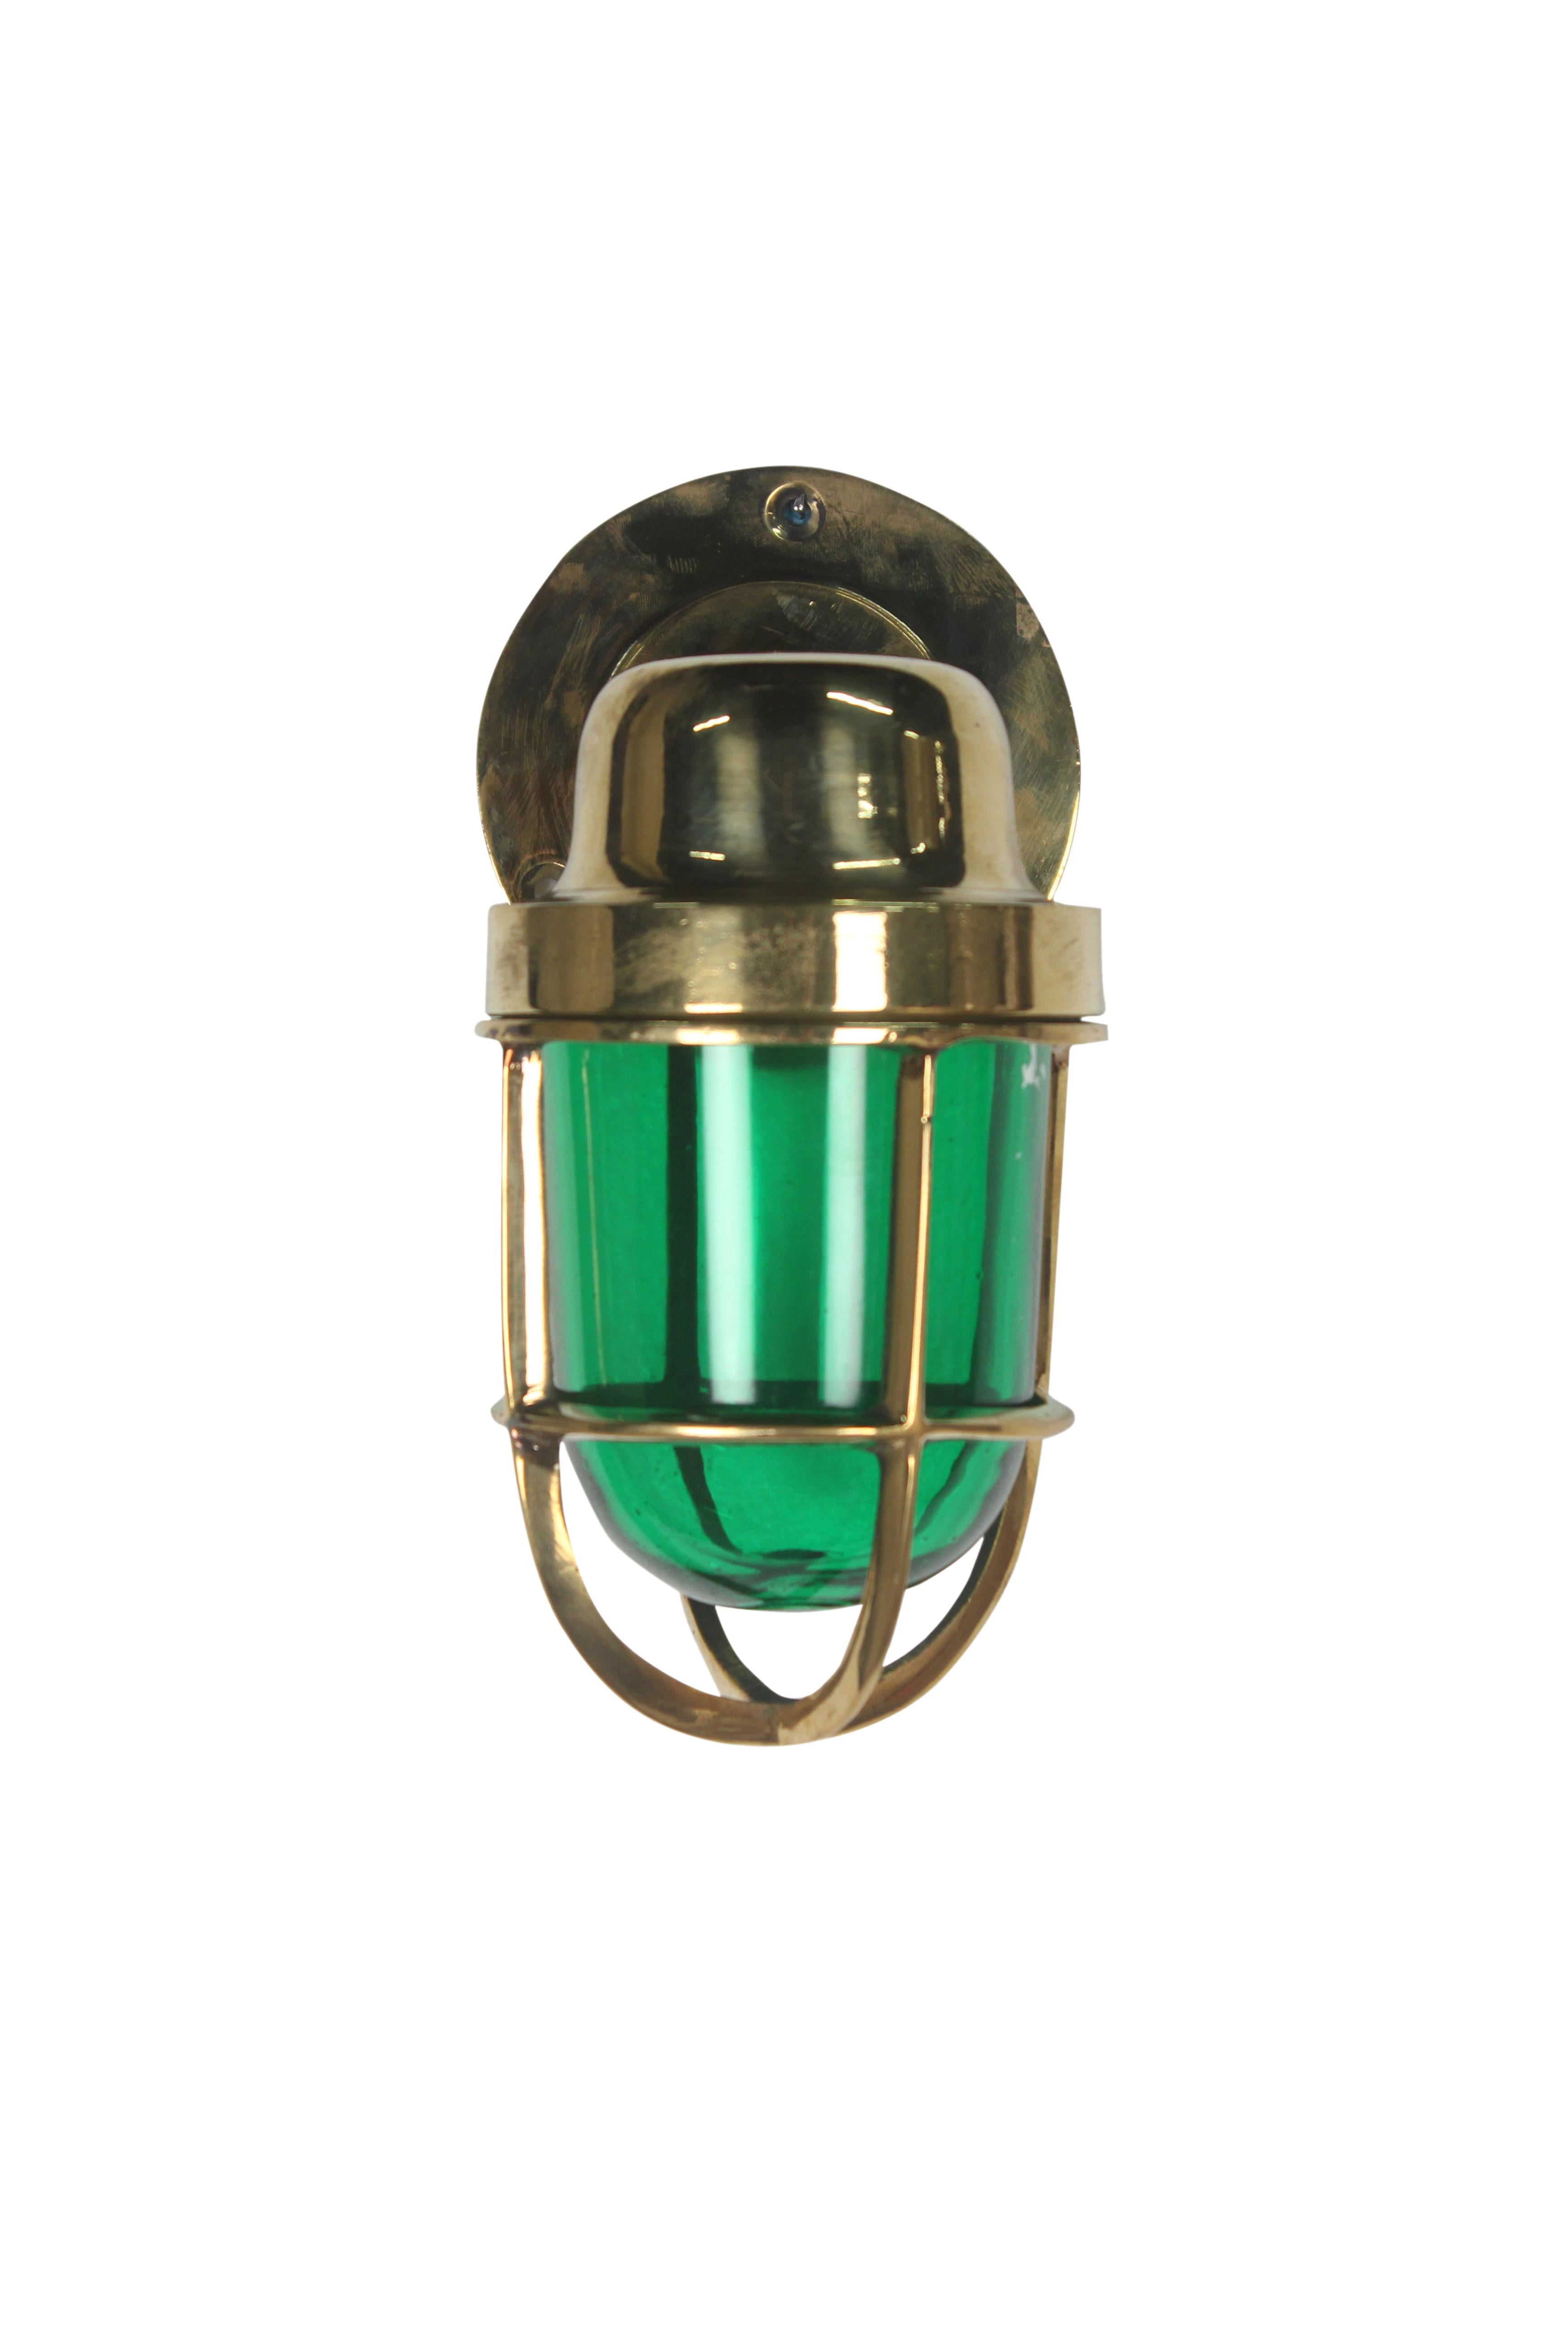 A pair of port and starboard brass cage lights from a decommissioned ship. Brass cage unscrews from the holder above as does the red or green glass shade. Rewired for American use, 1970s. Use inside or out.